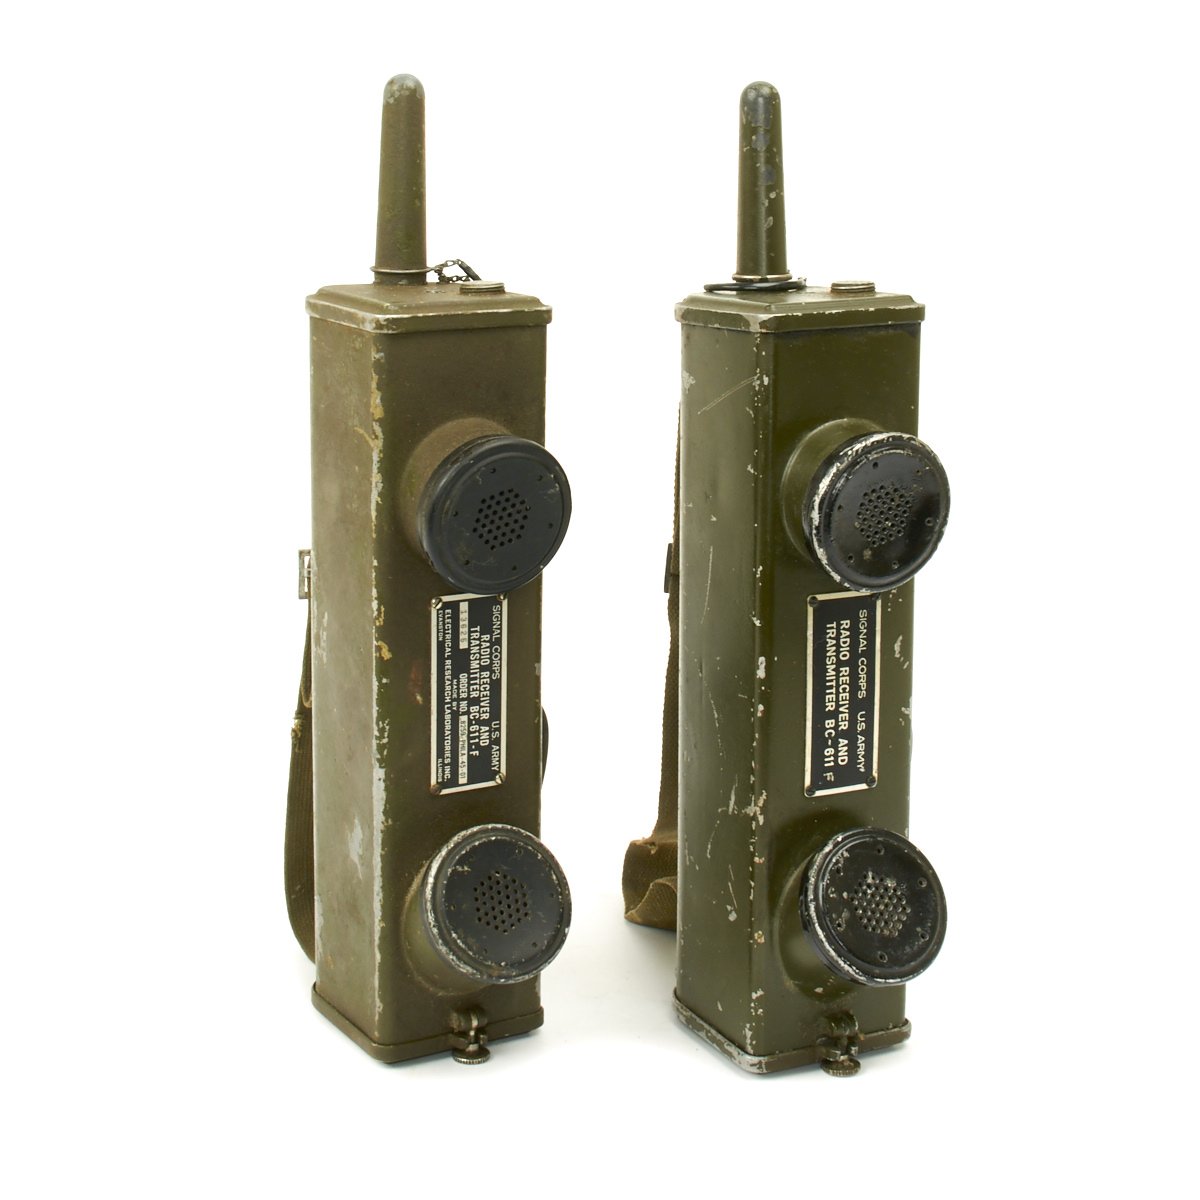 WWII US Army Signal Corps SCR-536 Hand Held Walkie Talkie Radio Transc -  Top Pots - WWII US M-1 Helmets, Liners and Reproduction Uniform Sales